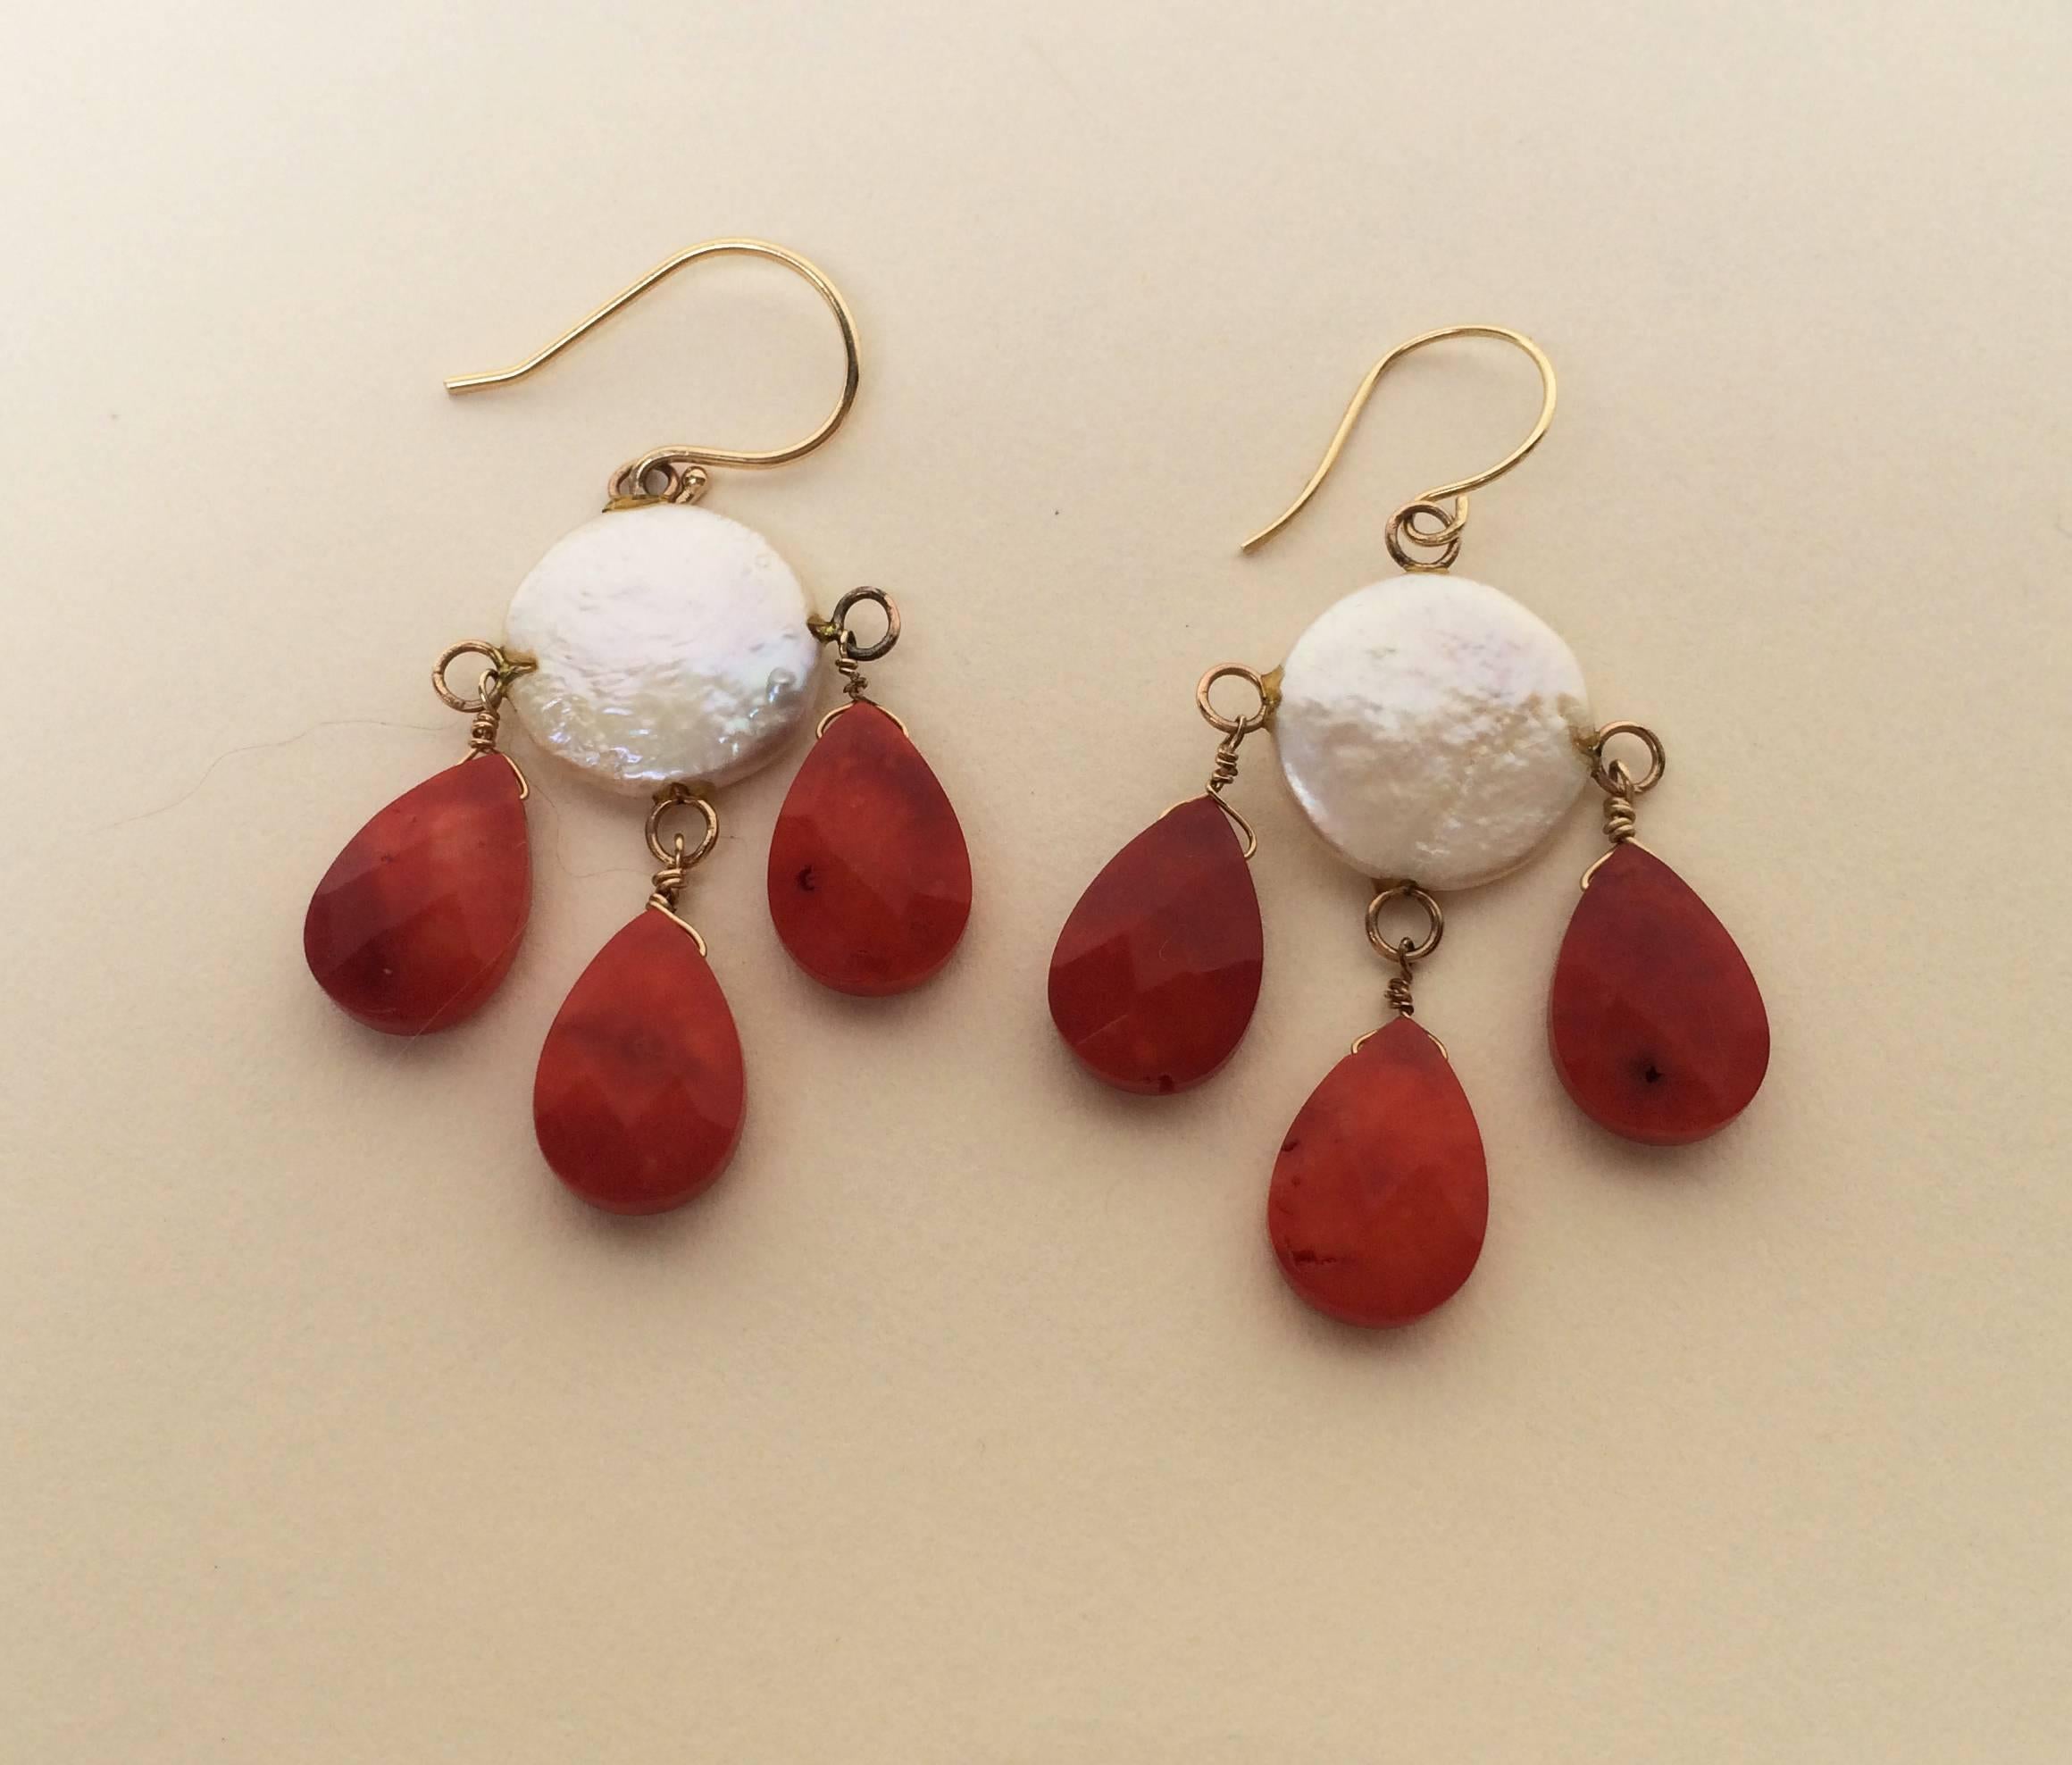 Artist Coin Pearl and Coral Drop Earrings by Marina J